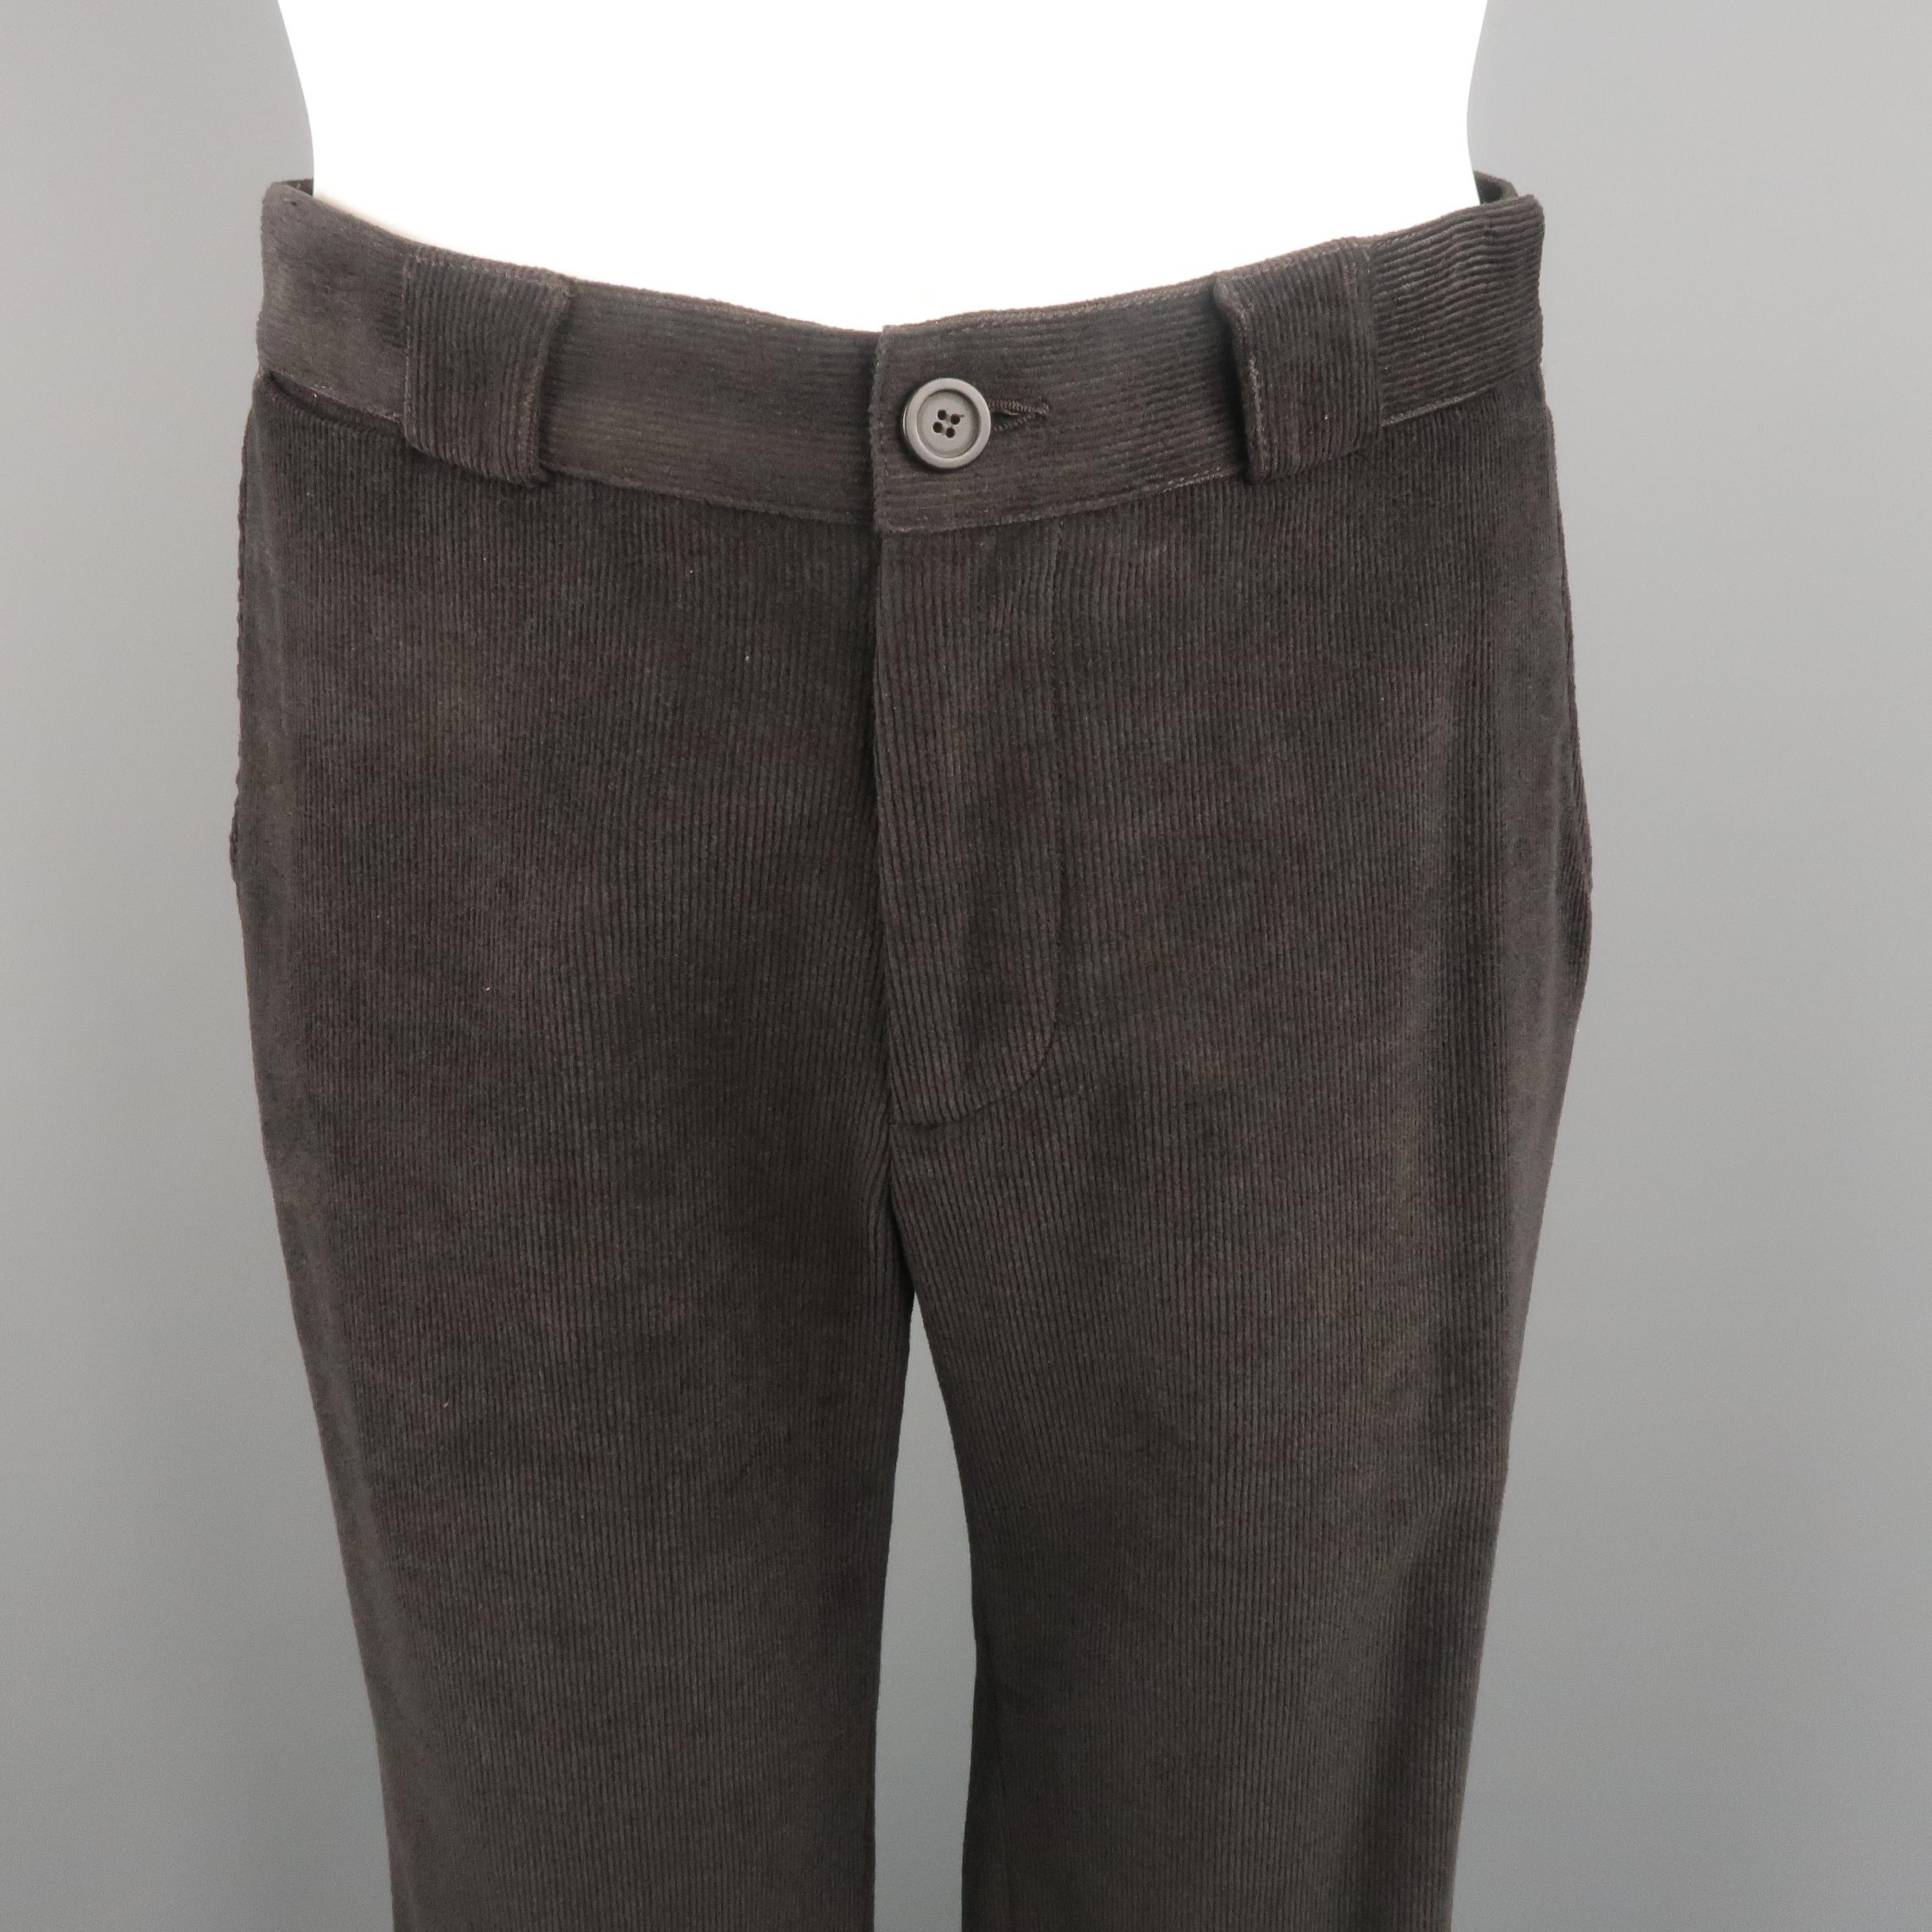 GIORGIO ARMANI dress pants come in dark brown tone corduroy with slant side pockets and detailed closure of back pockets. Made in Italy.
 
New with tags.
Marked: 50  IT
 
Measurements:
 
Waist: 34 in.
Rise: 10 in.
Inseam: 34 in